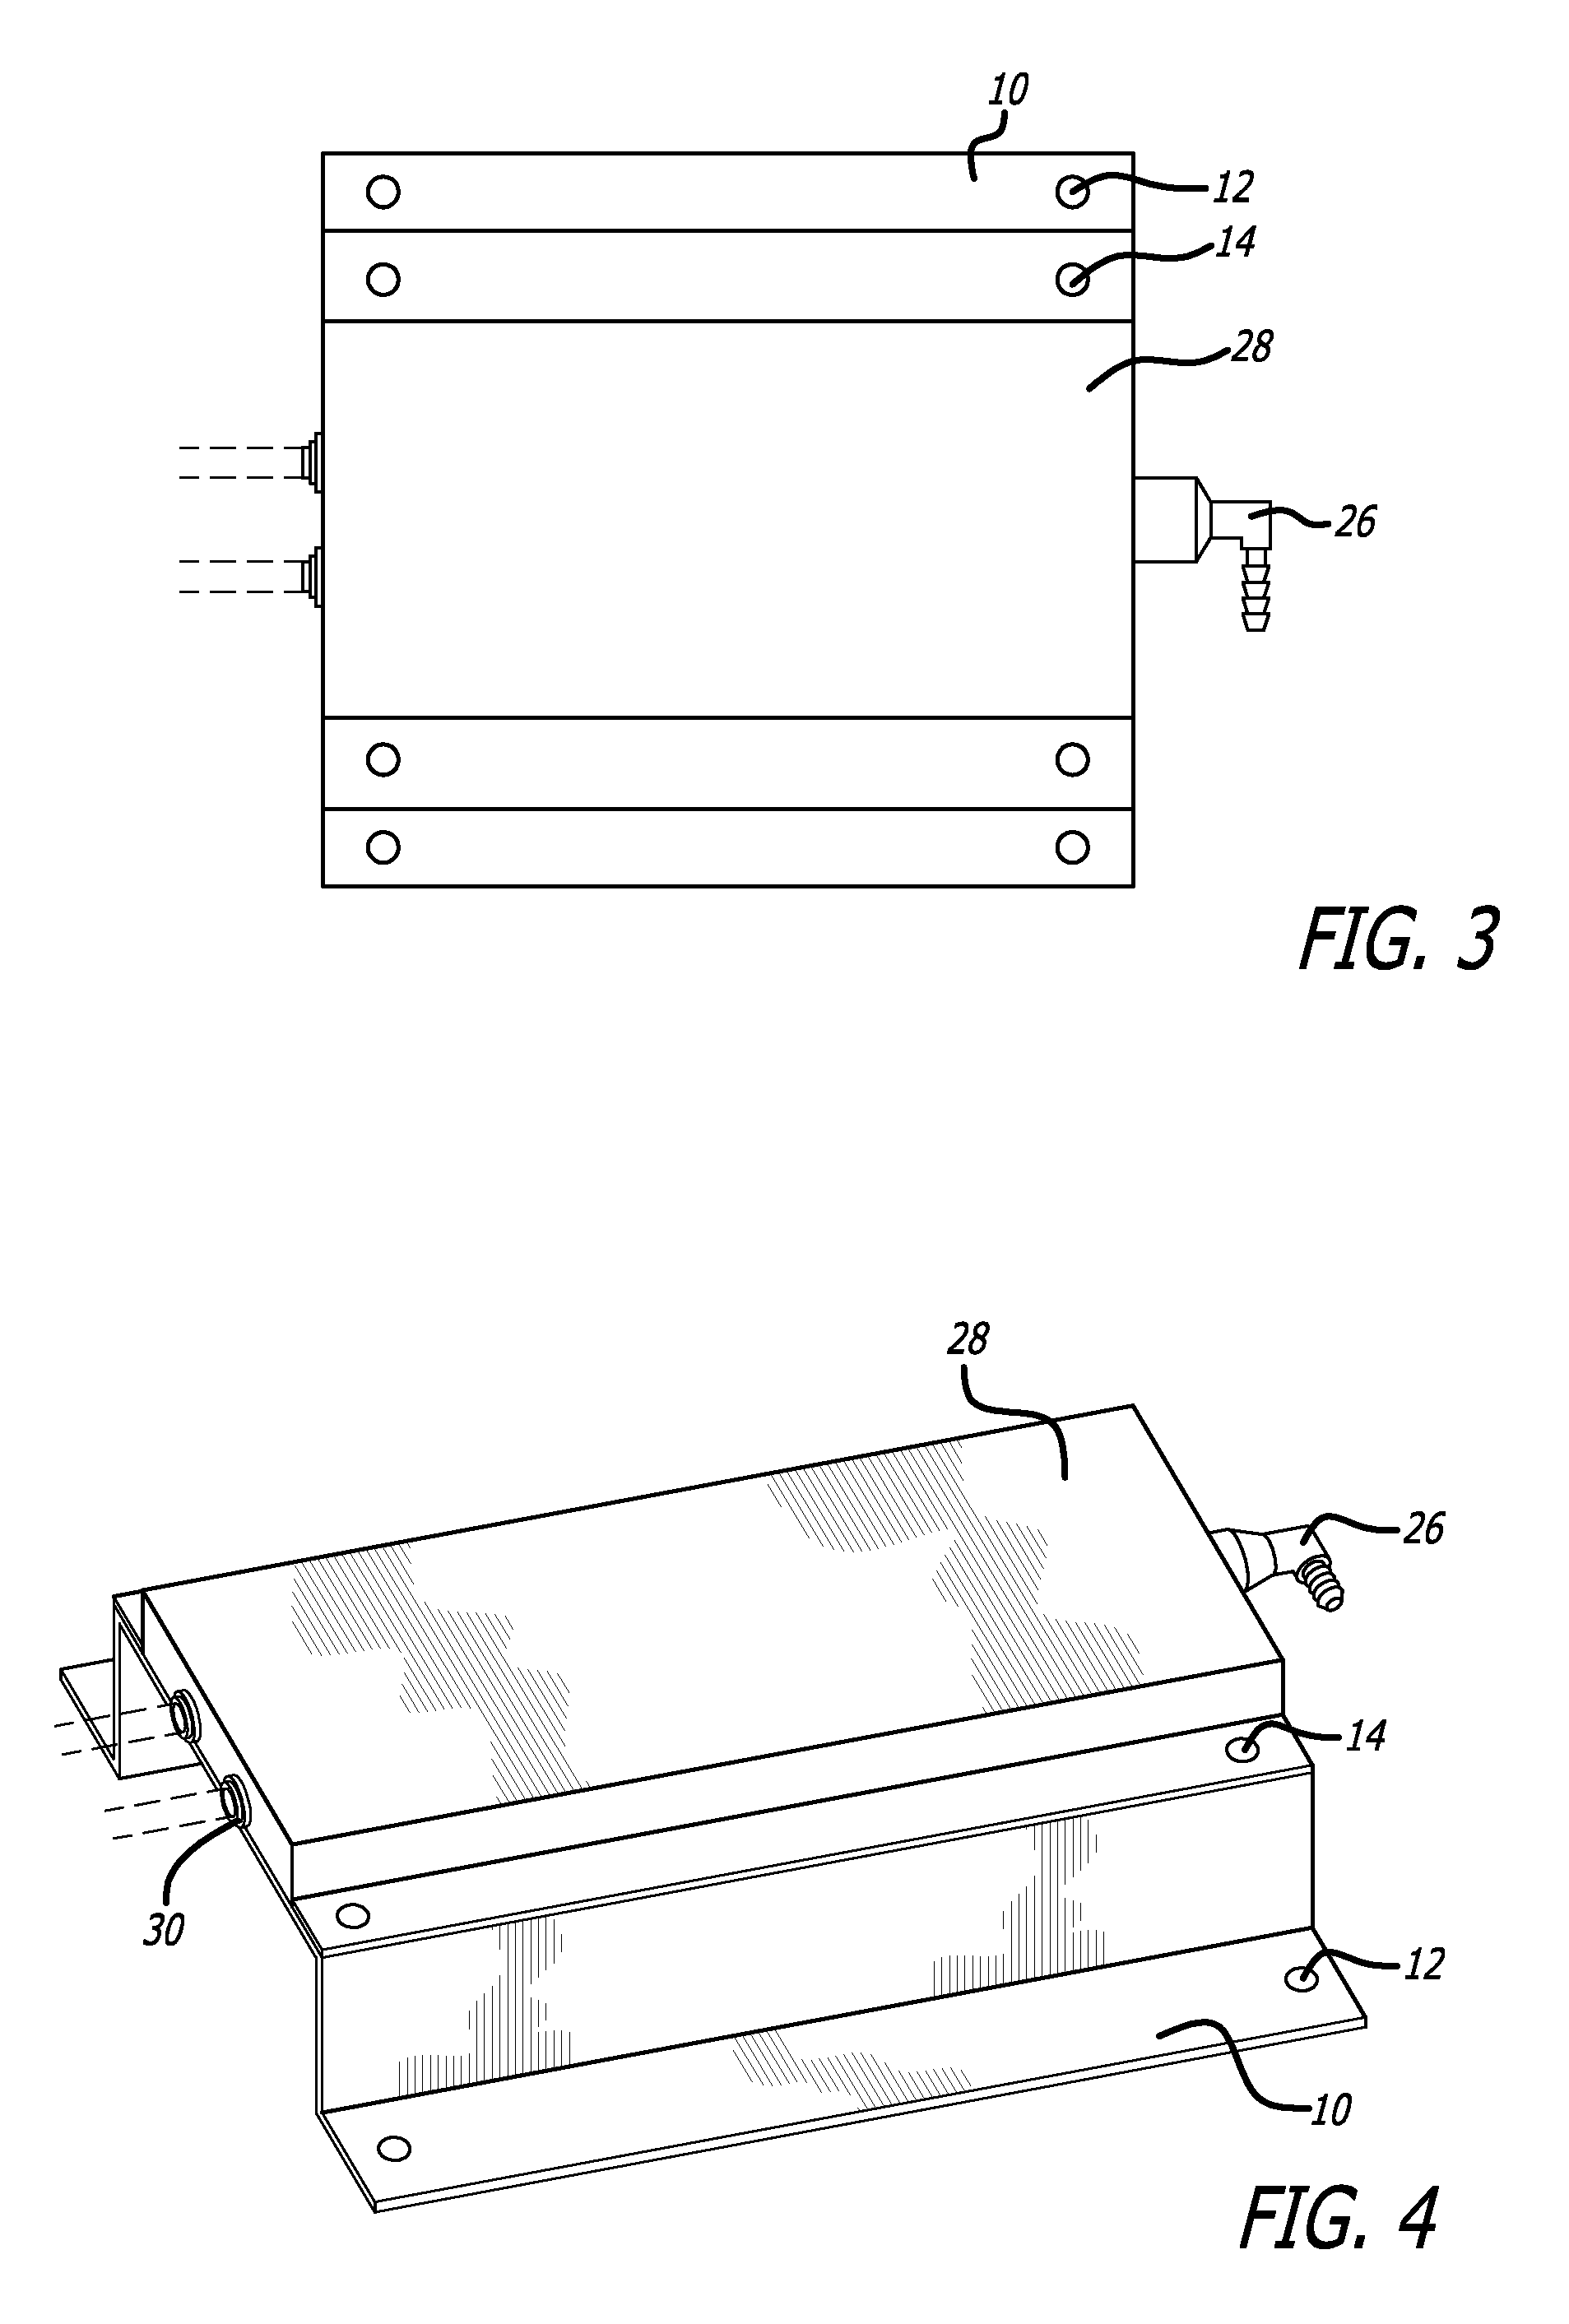 Method and Apparatus for Combination and Delivery of Beverages for Consumption